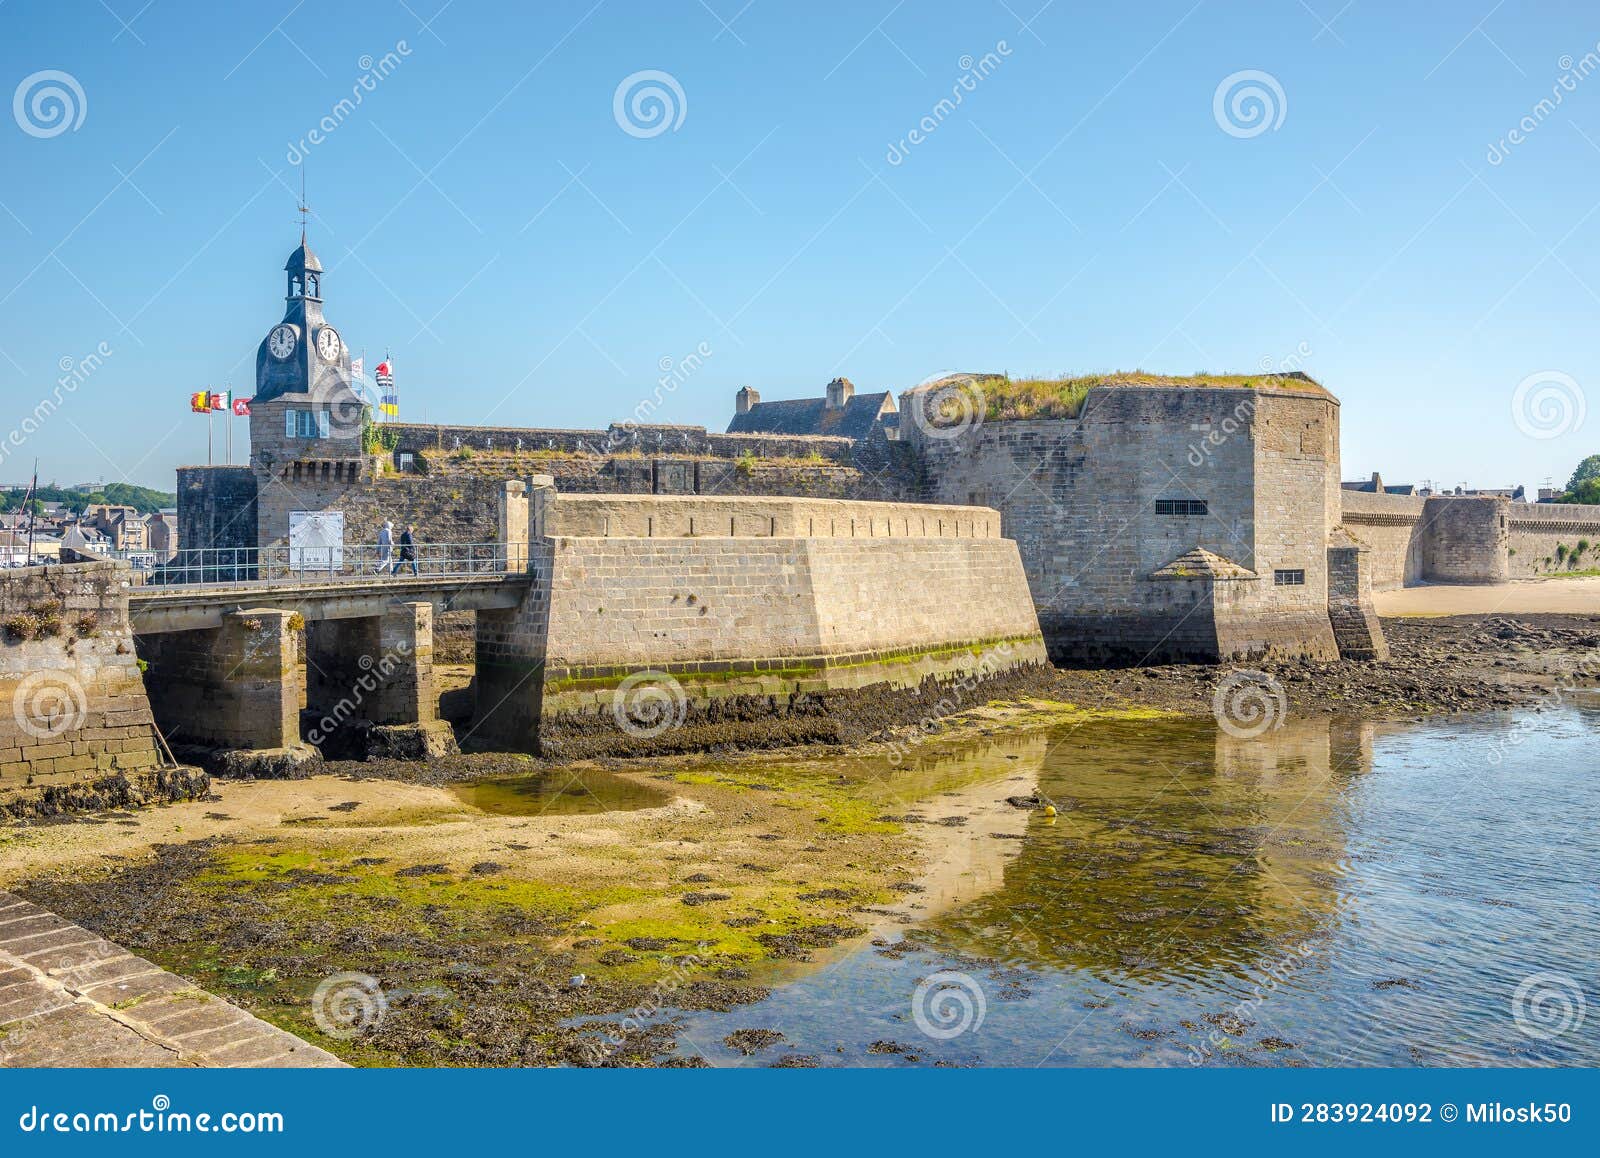 view at the fortress in concarneau town, france